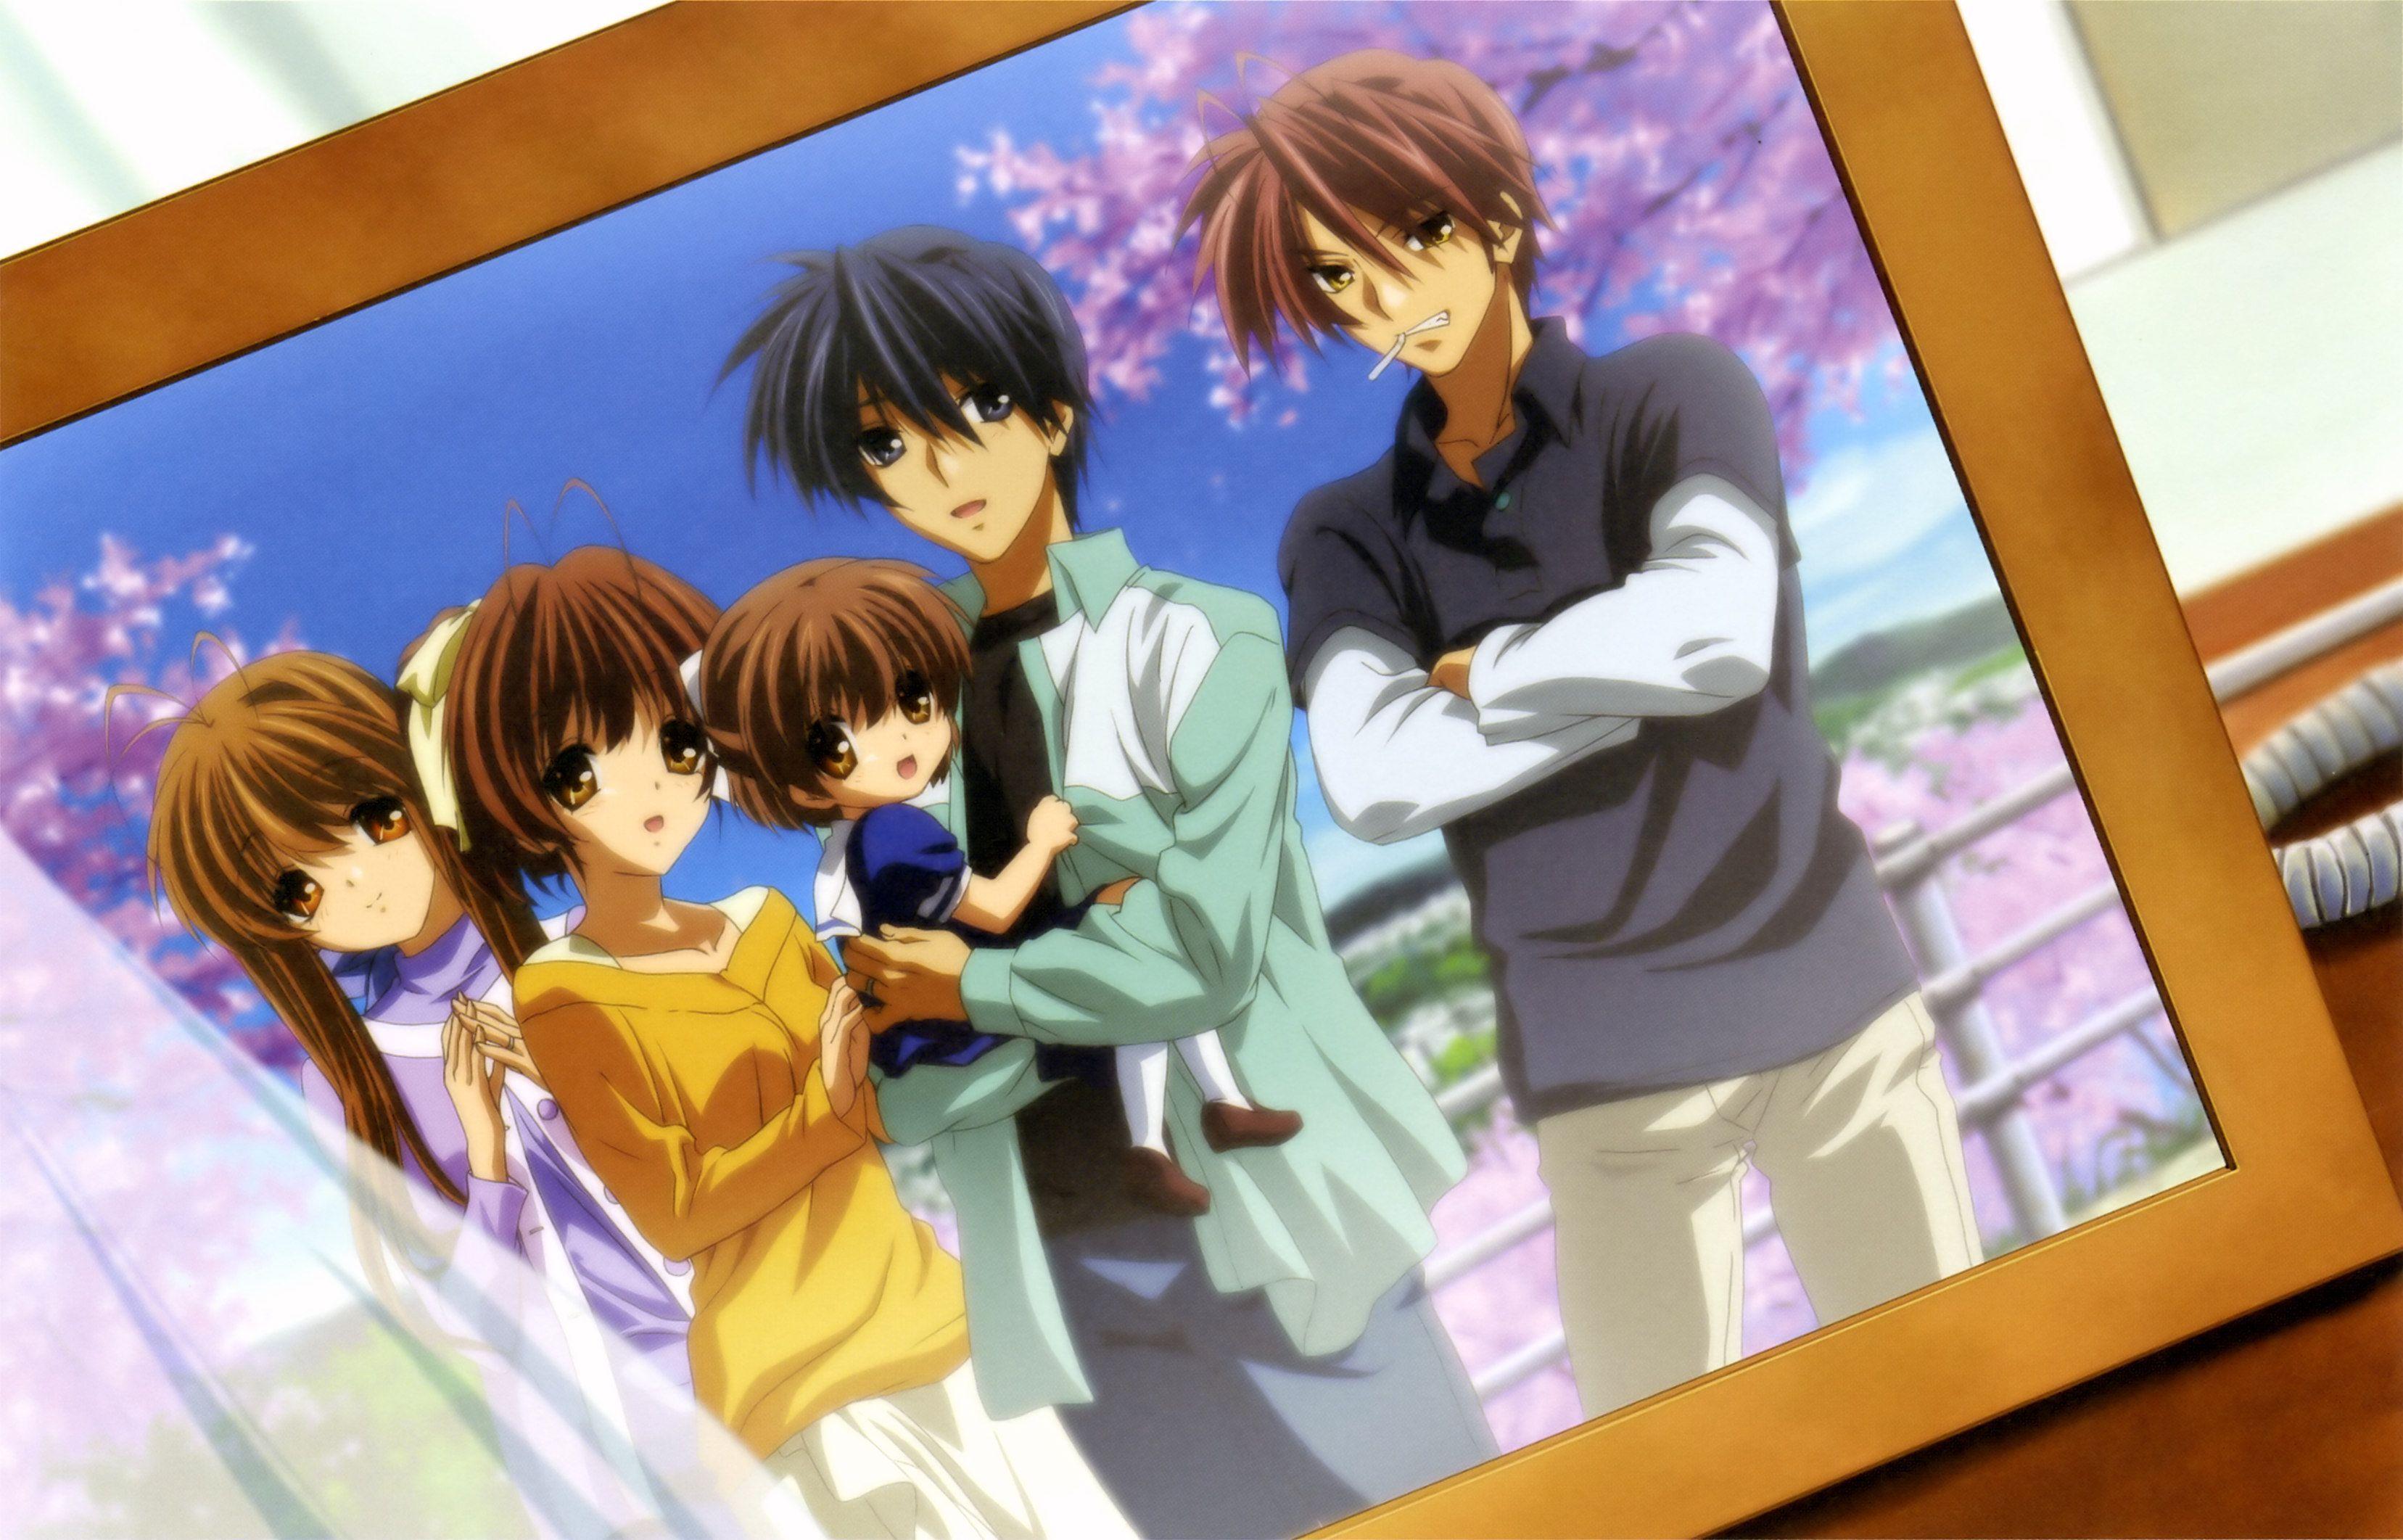 image For > Clannad After Story Nagisa And Tomoya